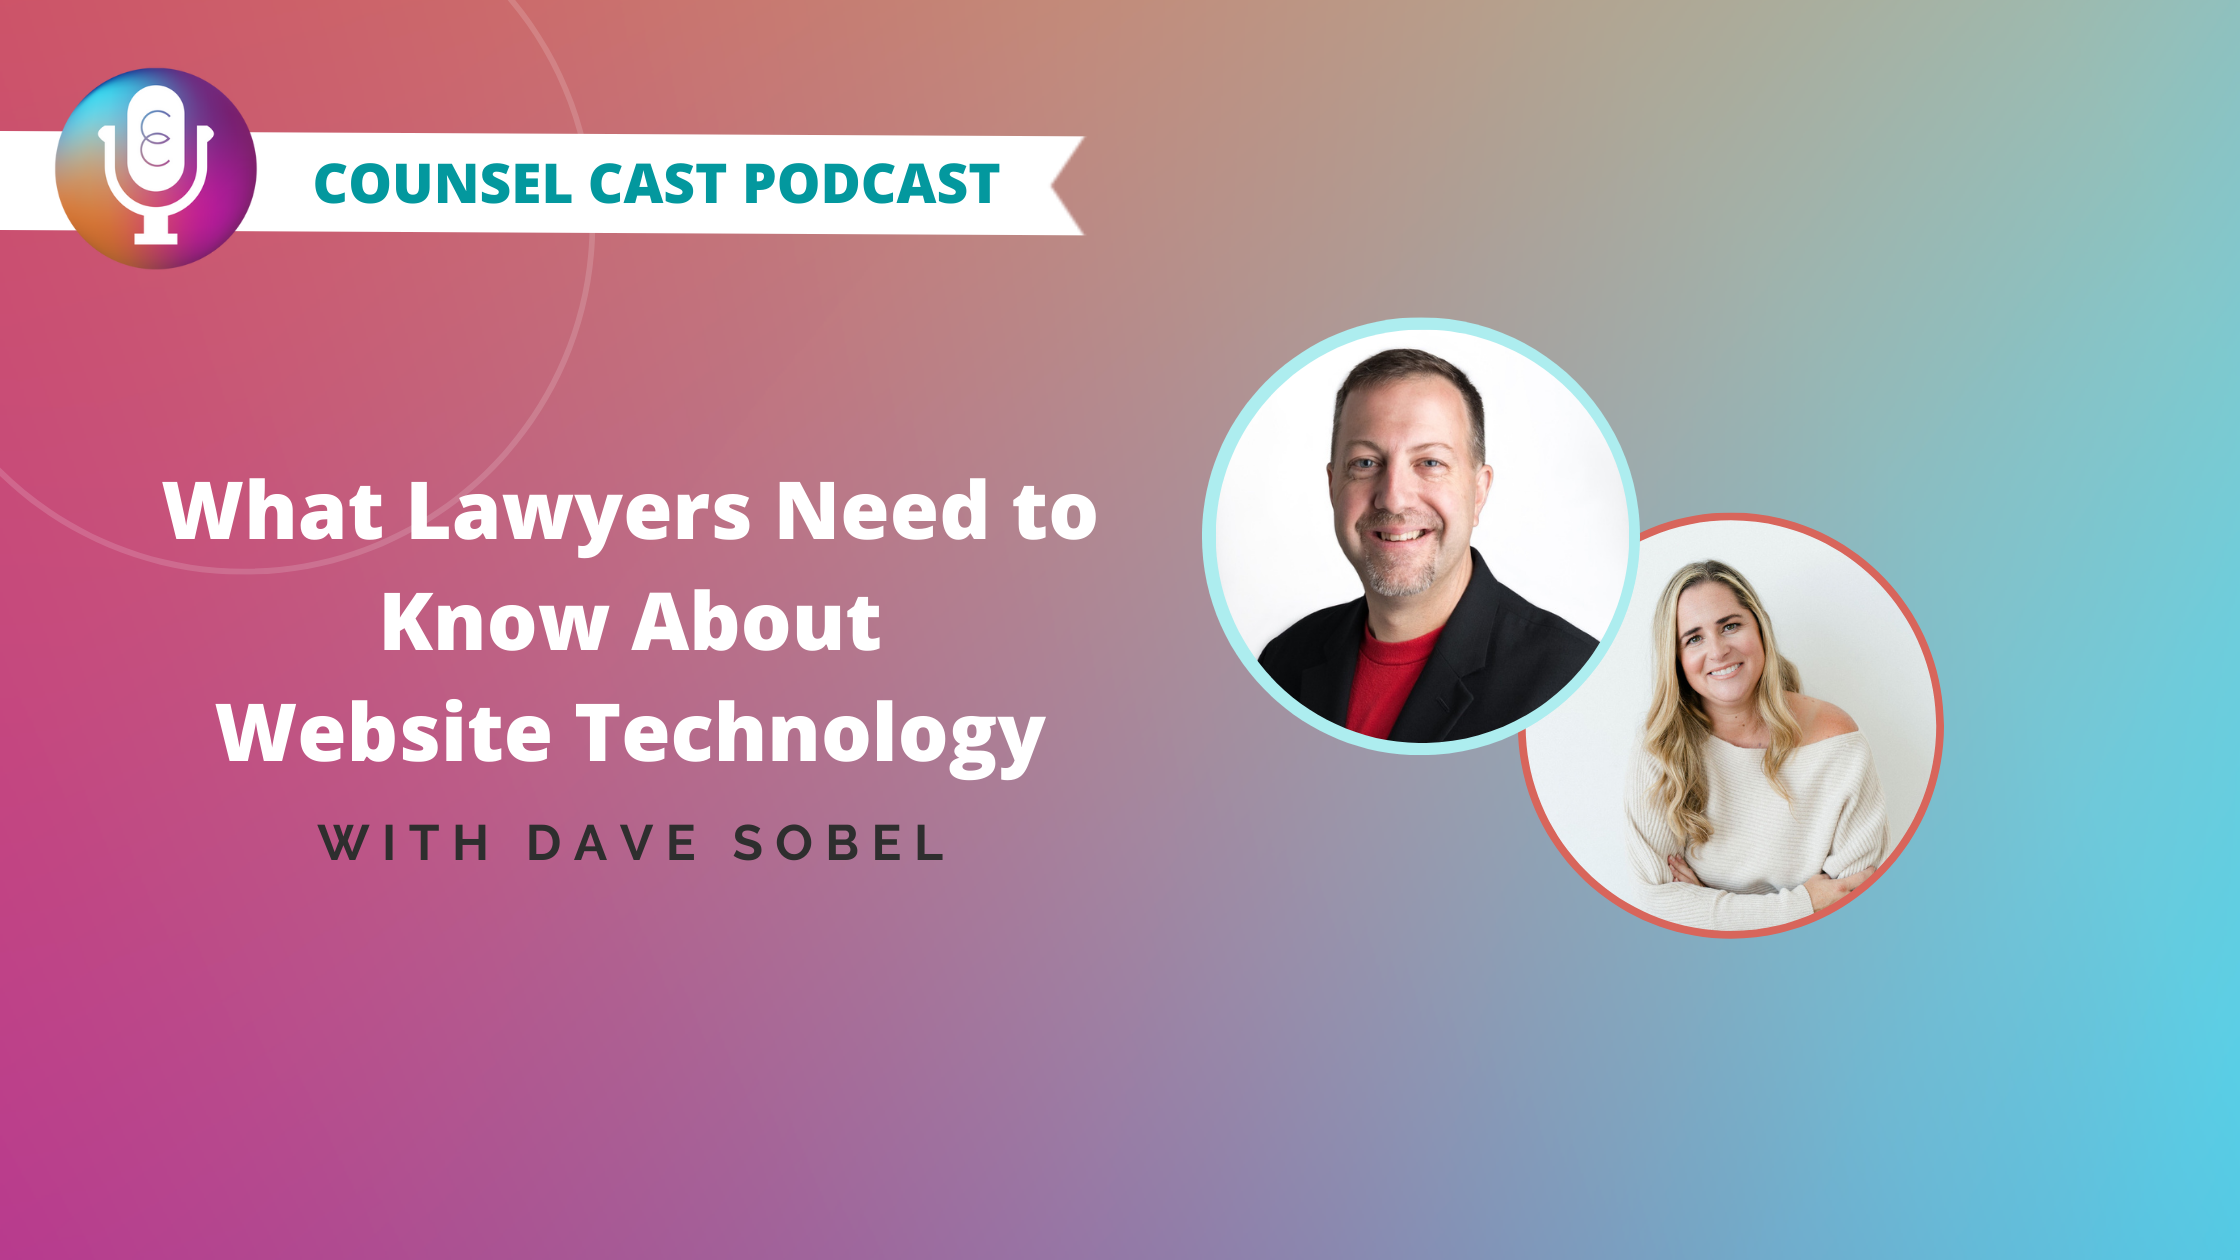 What Lawyers Need to Know About Website Technology with Dave Sobel